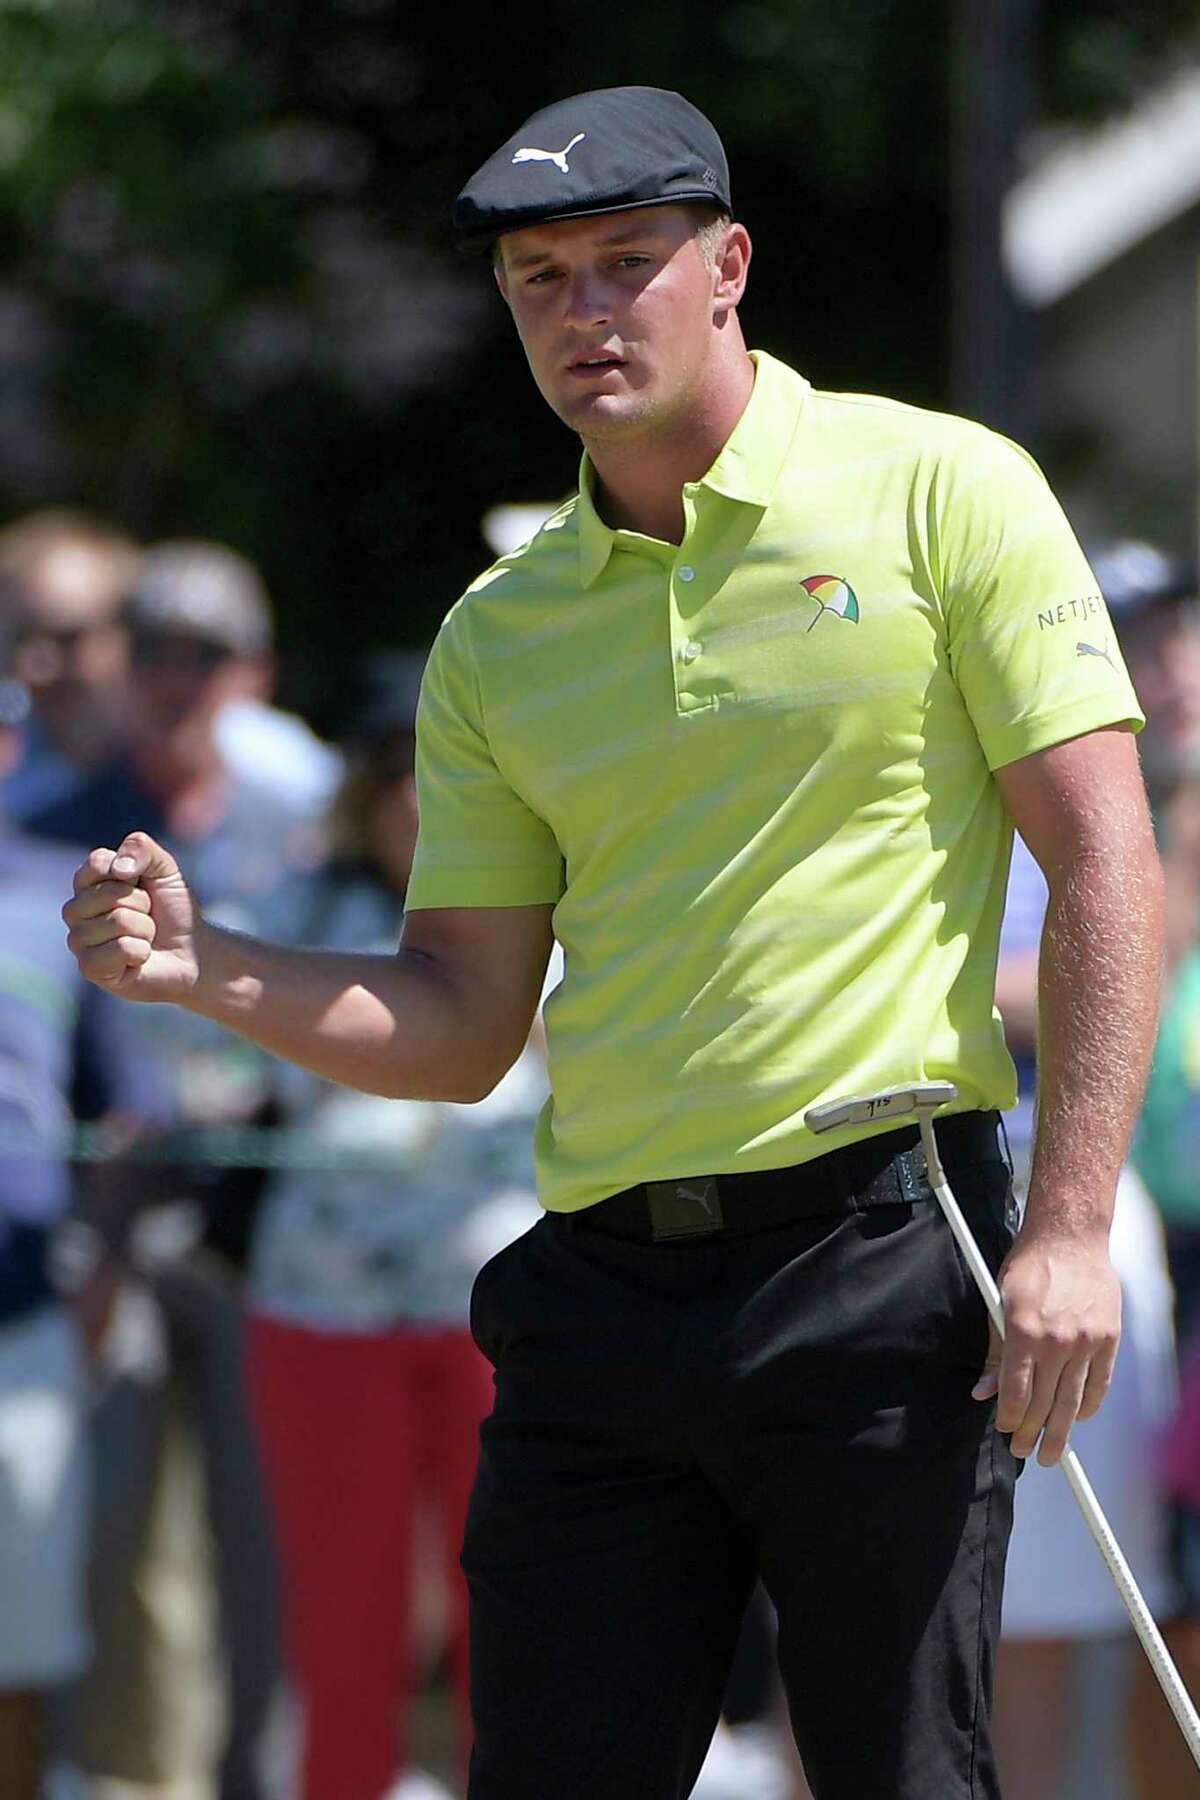 Bryson DeChambeau pumps his fist after making a putt for birdie on the second green during the third round of the Arnold Palmer Invitational golf tournament Saturday, March 17, 2018, in Orlando, Fla. (AP Photo/Phelan M. Ebenhack)